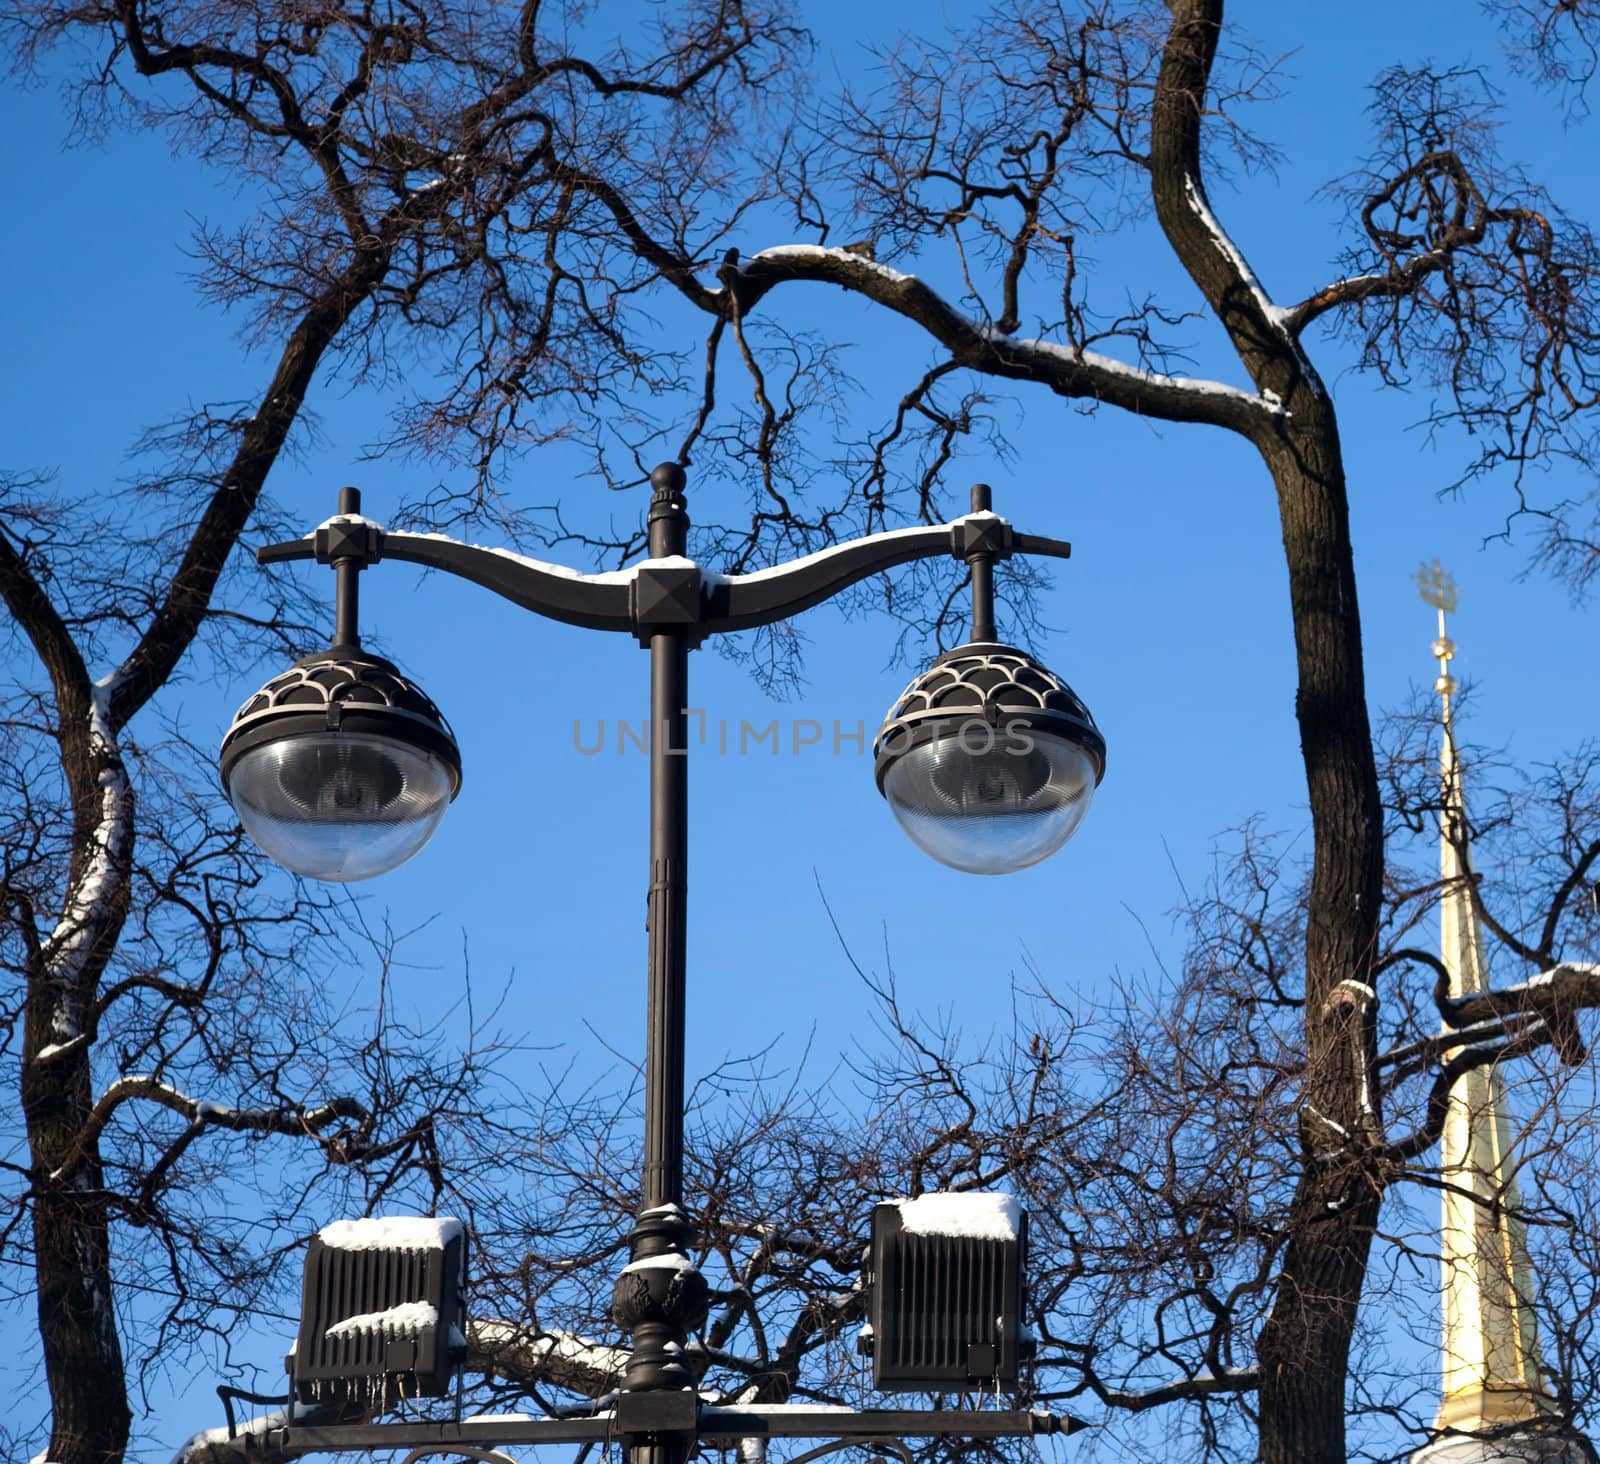 Vintage Street lighting. Against the backdrop of twisting trees and golden spire.